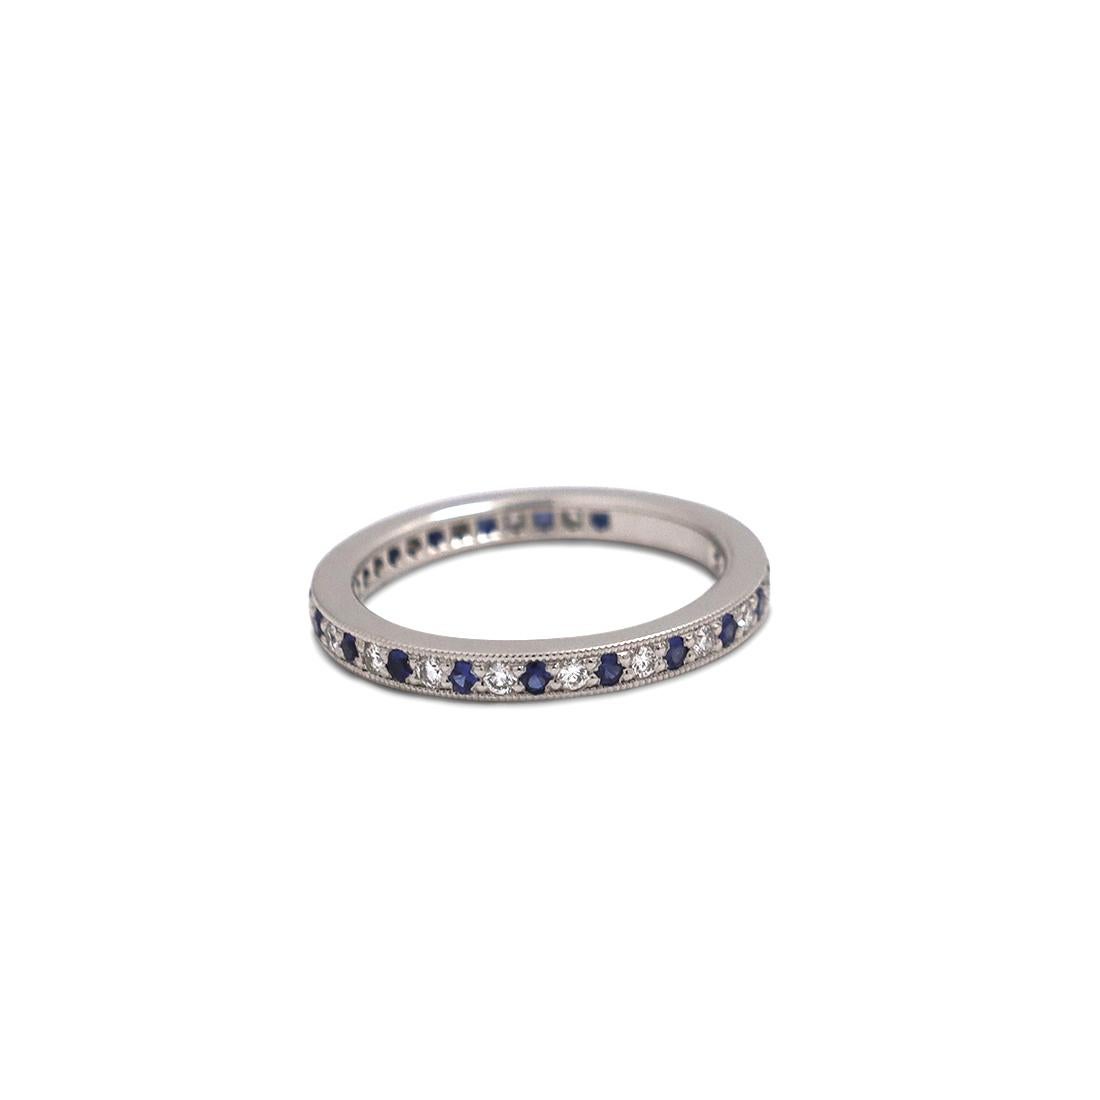 Authentic Tiffany & Co. 'Legacy' band ring evokes the glamour of the Edwardian period. The ring is crafted in platinum with a milgrain edge and a full circle of bead-set high-quality round brilliant cut diamonds weighing an estimated 0.20 carats